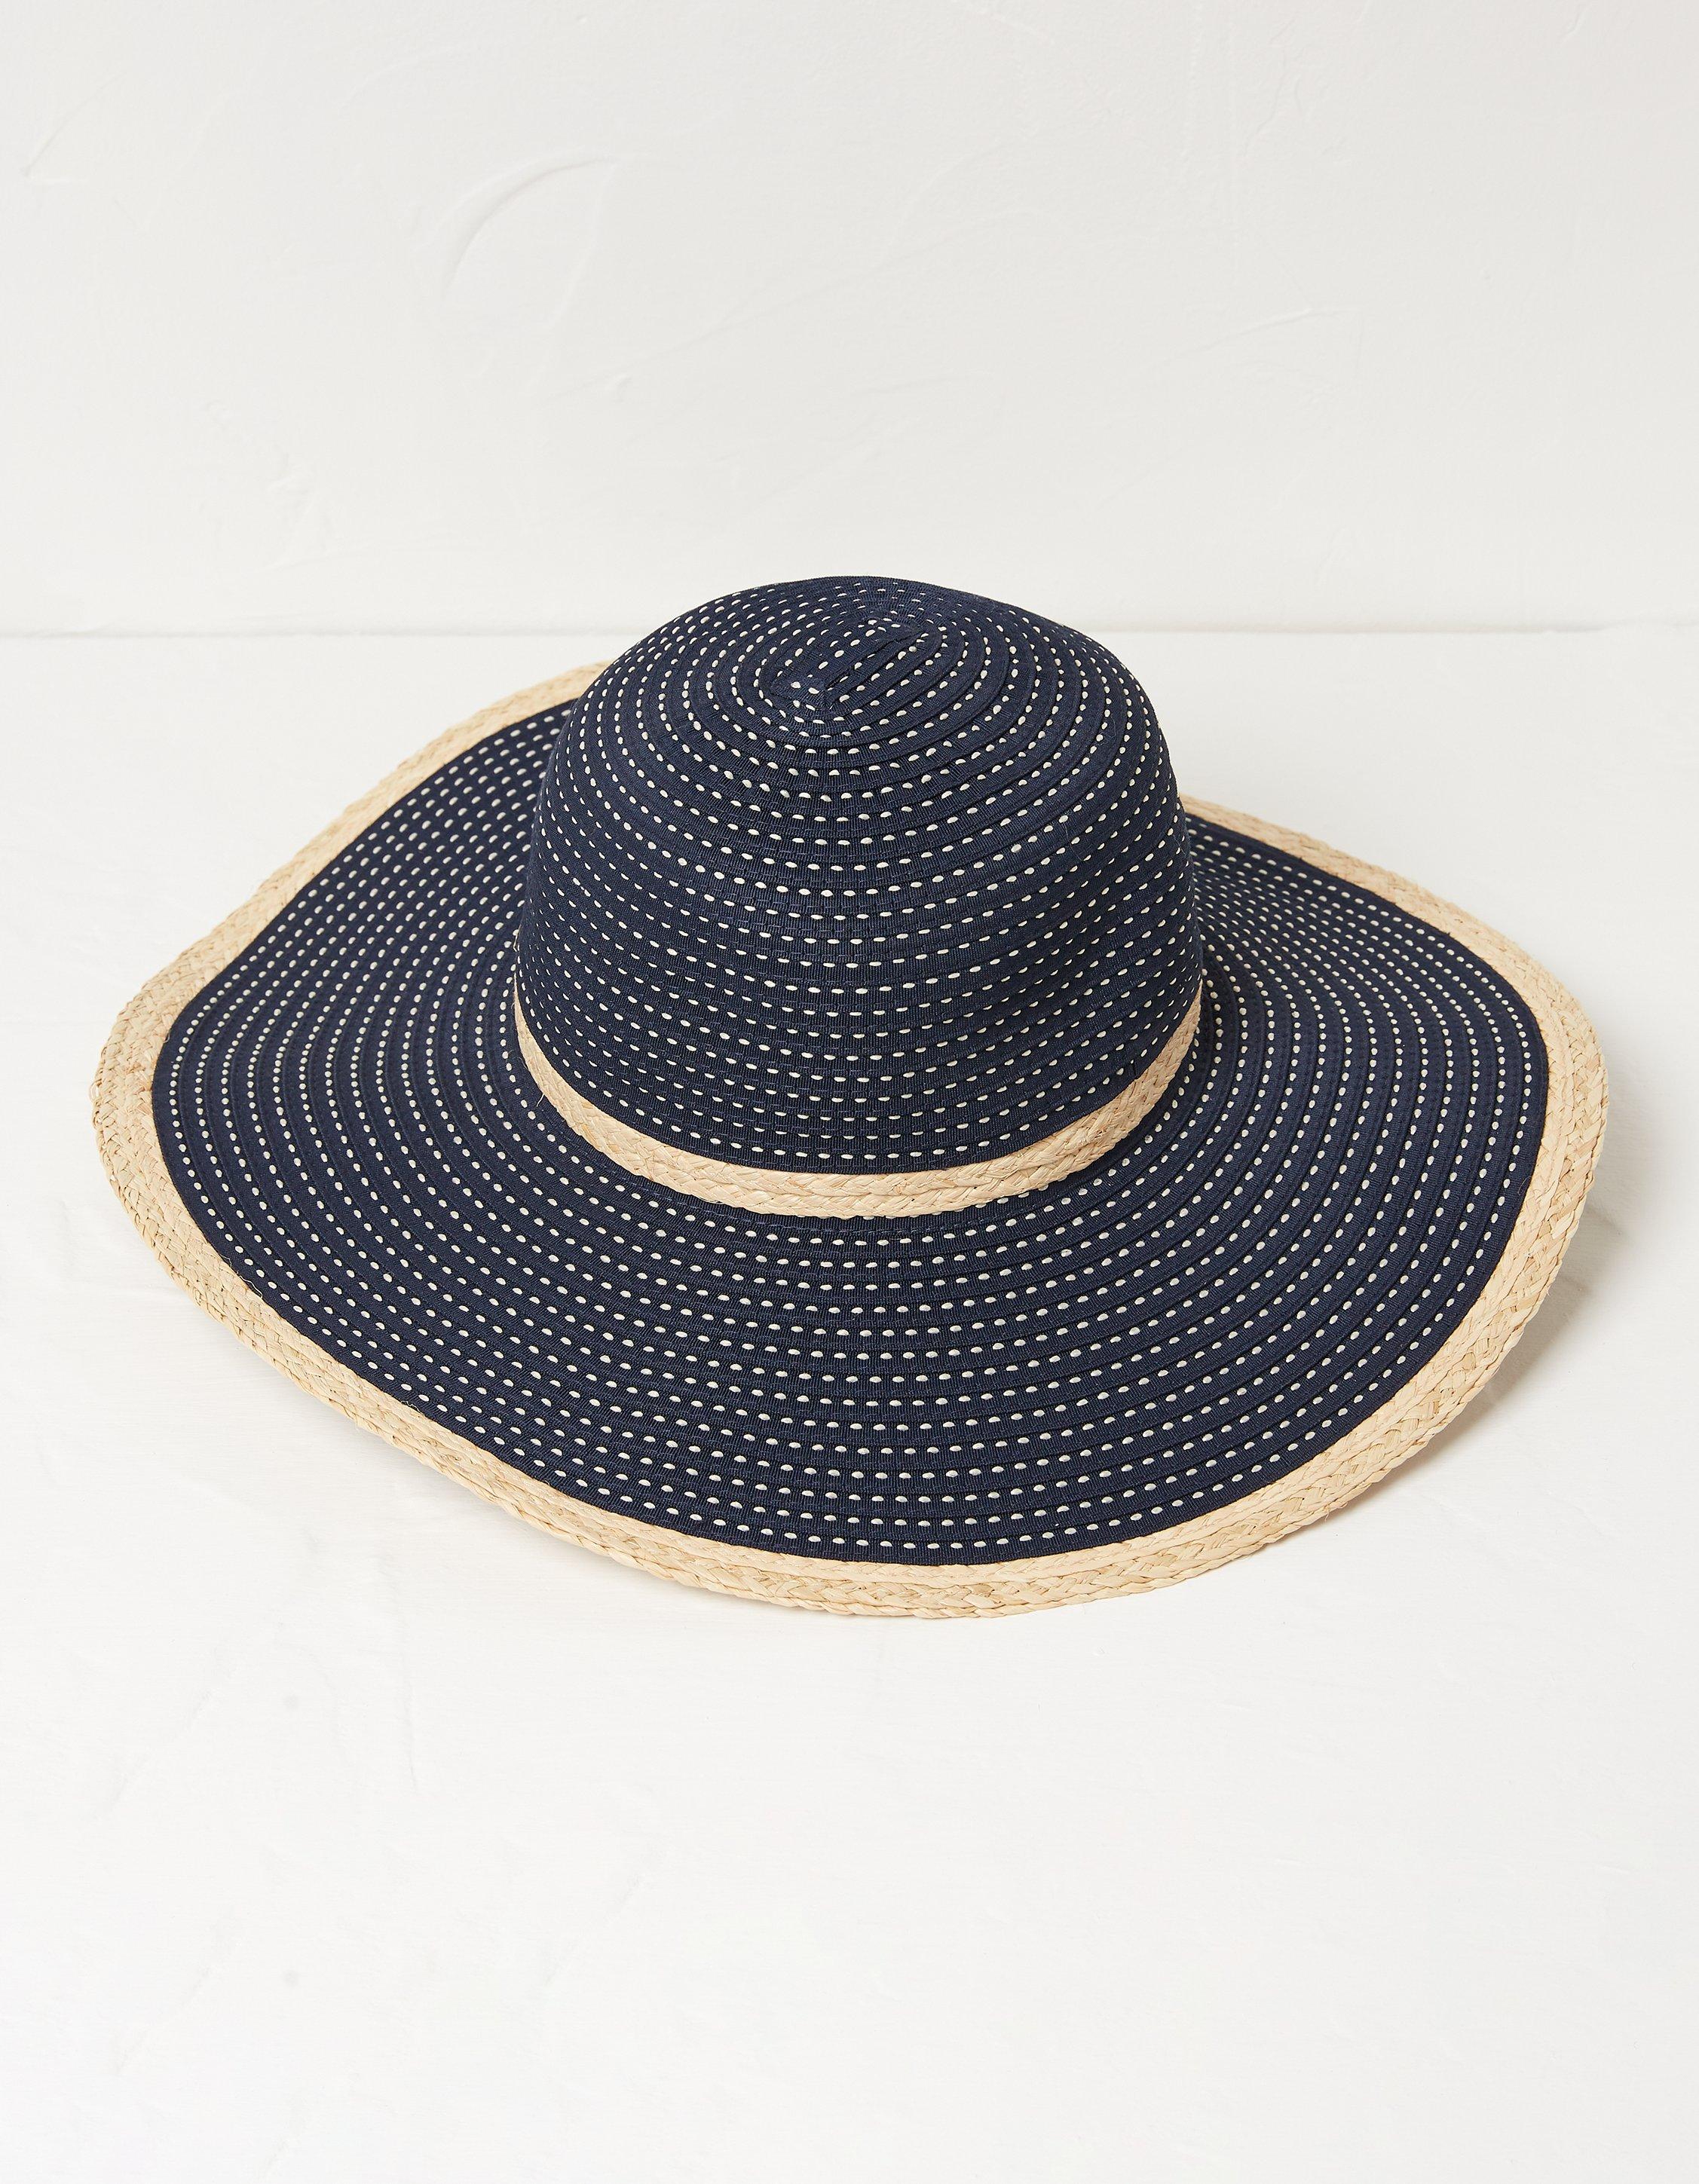 SEE SEE SPECIAL RIBON HAT NAVY - ハット